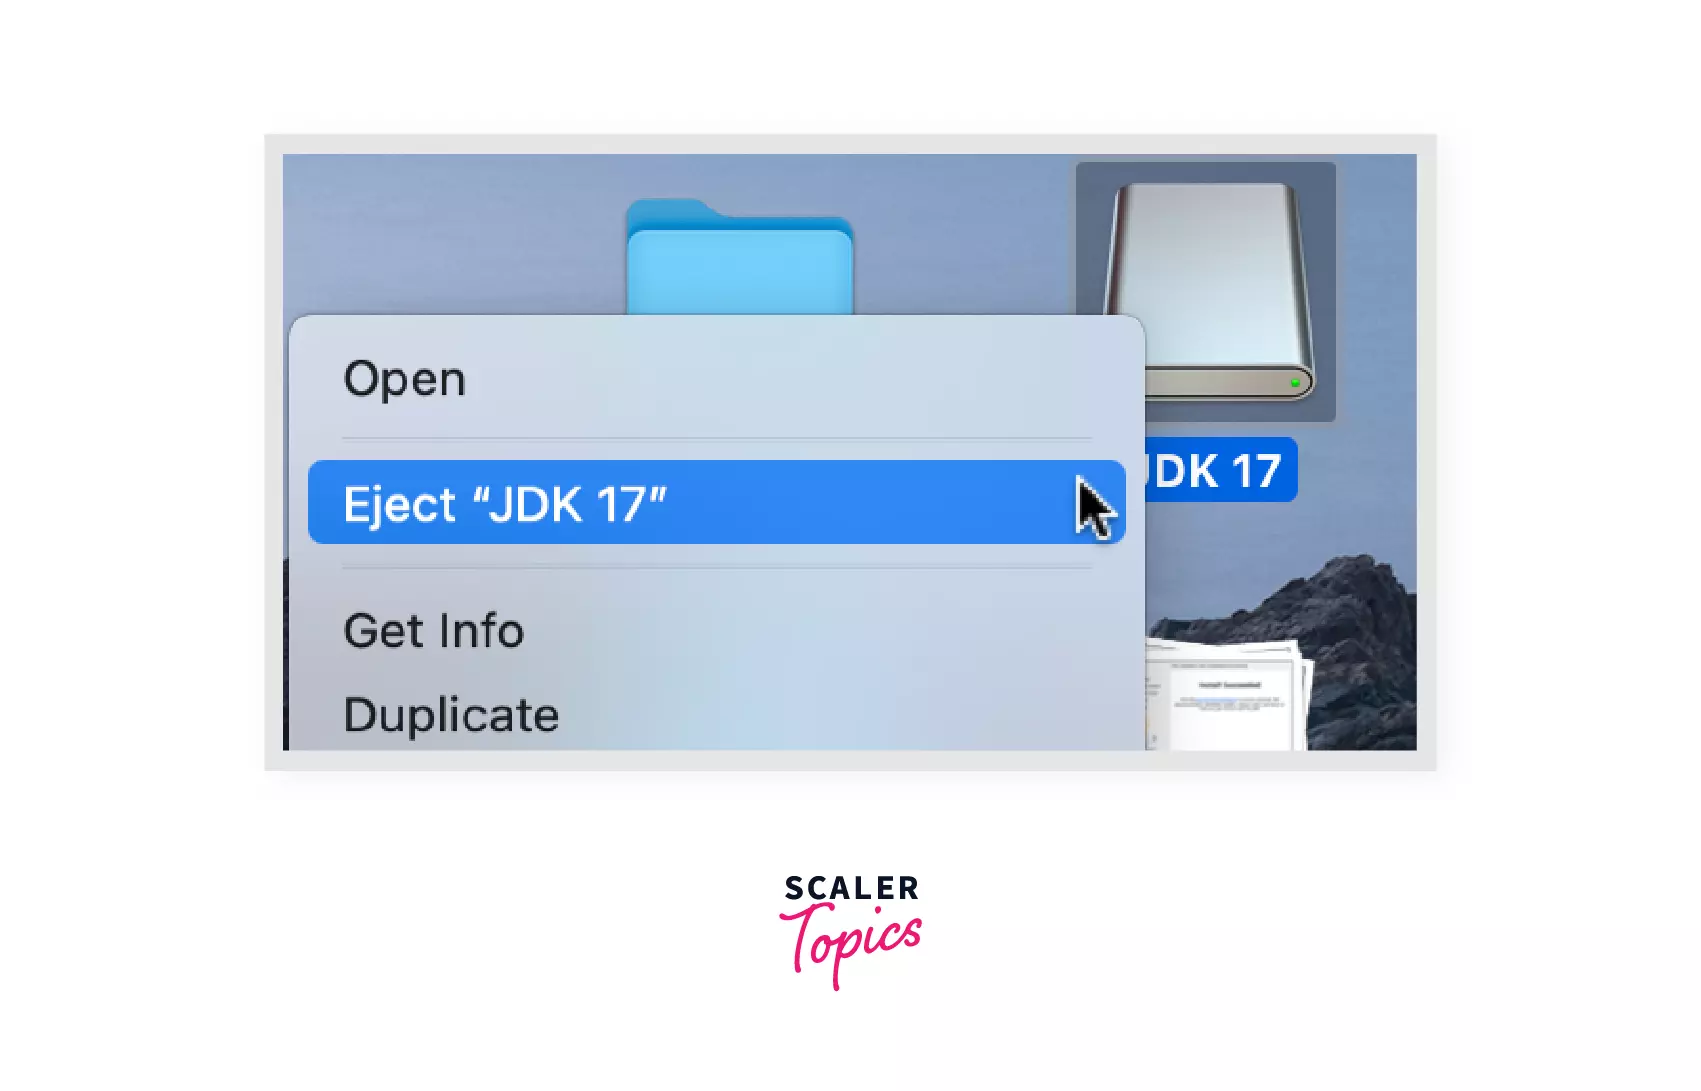 Eject JDK 17